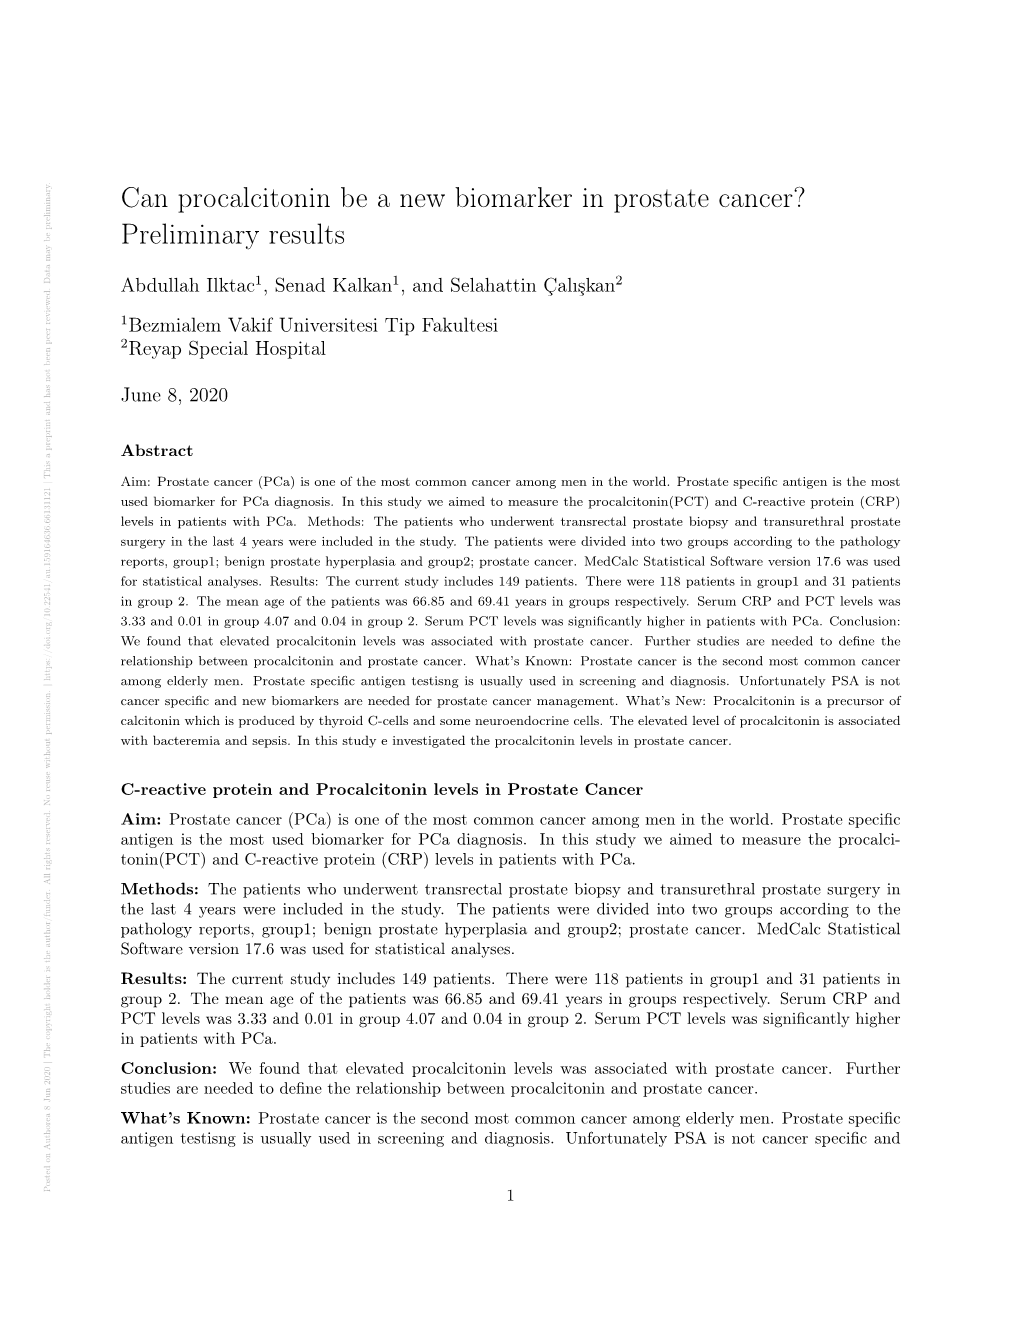 Can Procalcitonin Be a New Biomarker in Prostate Cancer?